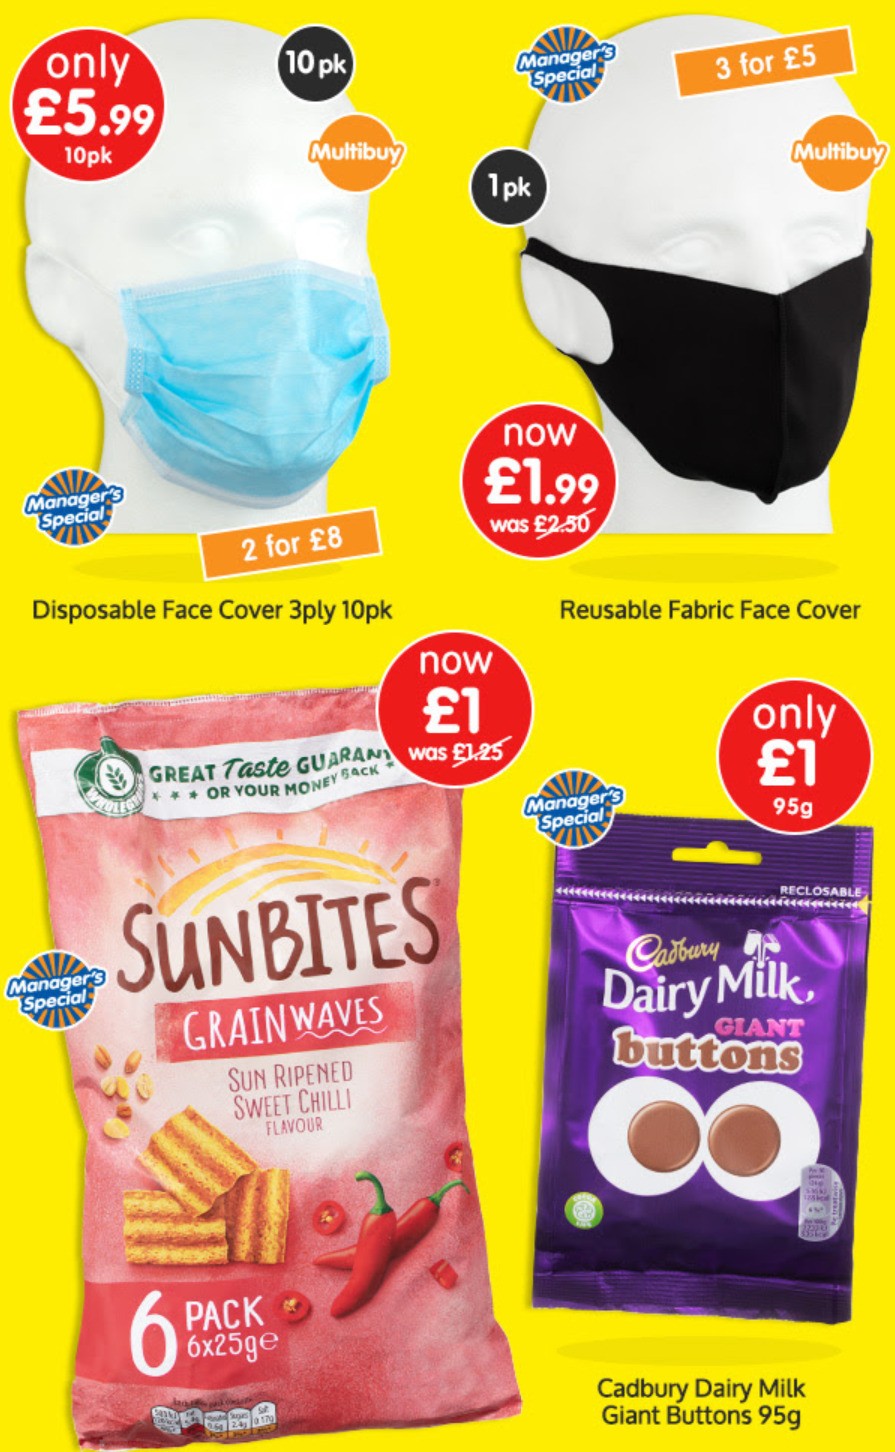 B&M Manager's Specials Offers from 1 July